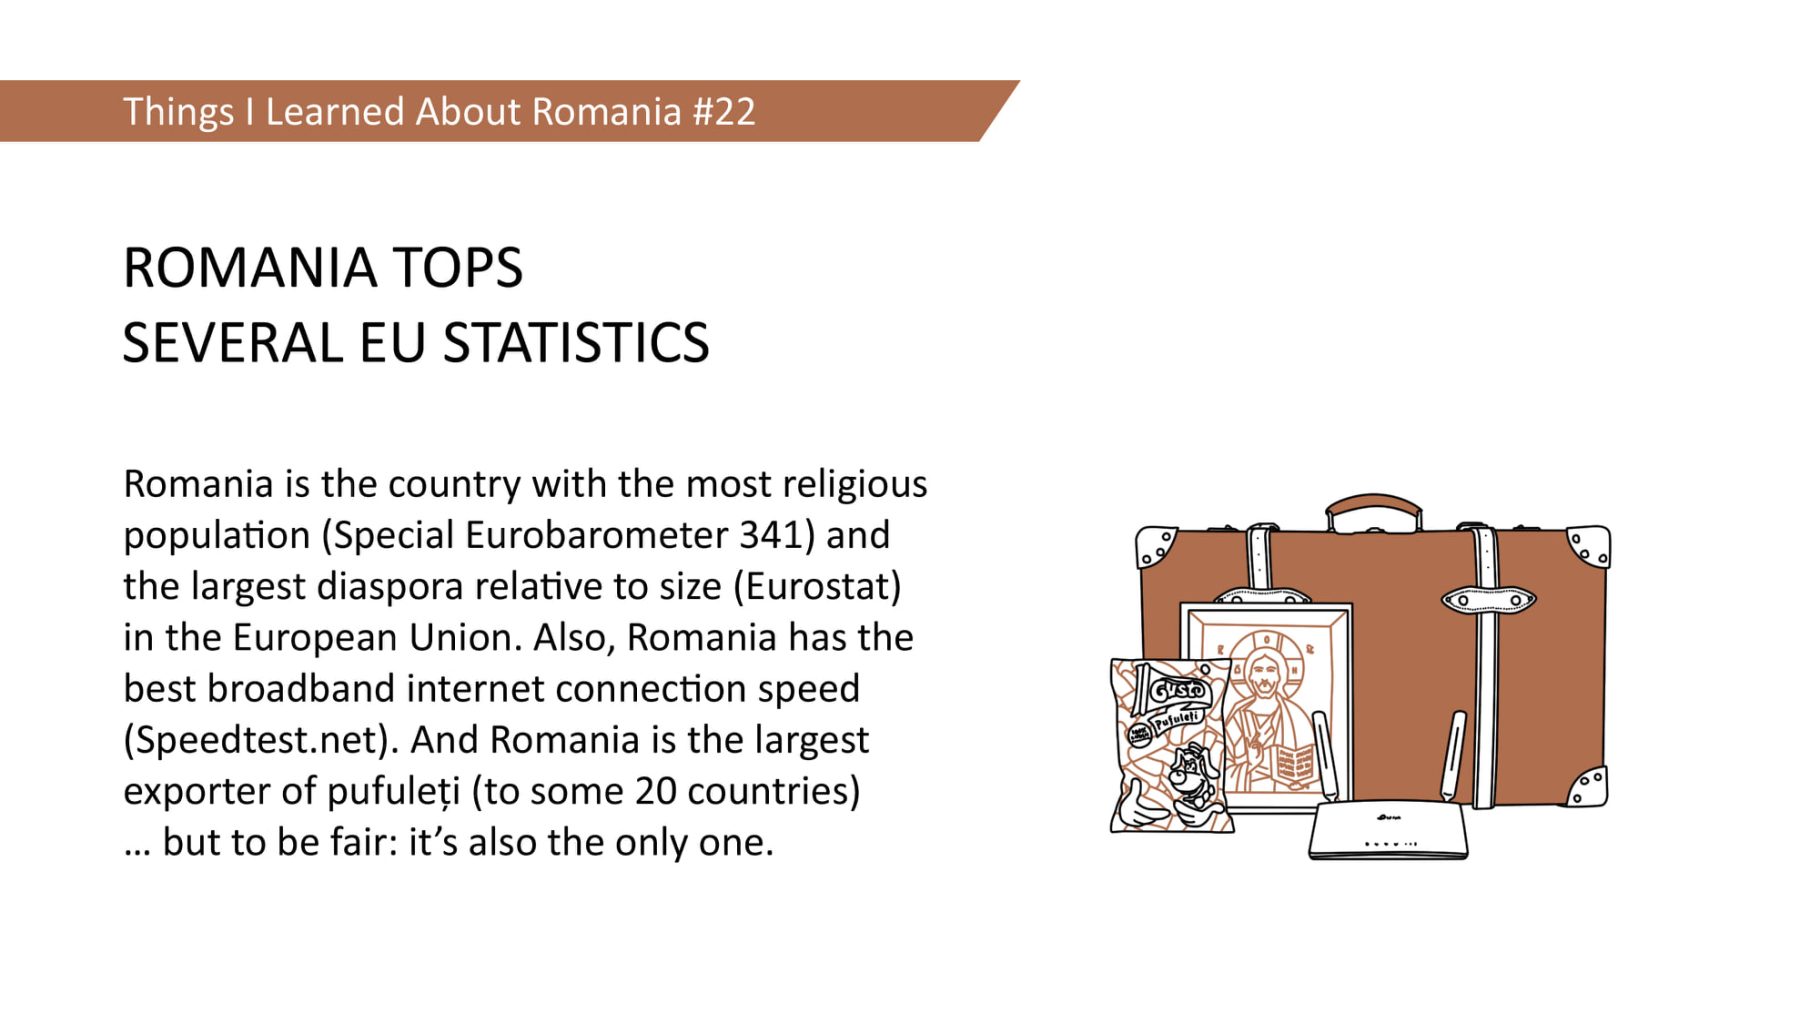 ROMANIA TOPS SEVERAL EU STATISTICS - Romania is the country with the most religious population (Special Eurobarometer 341) and the largest diaspora relative to size (Eurostat) in the European Union. Also, Romania has the best broadband internet connection speed (Speedtest.net). And Romania is the largest exporter of pufuleti (to some 20 countries) ... but to be fair: it's also the only one.